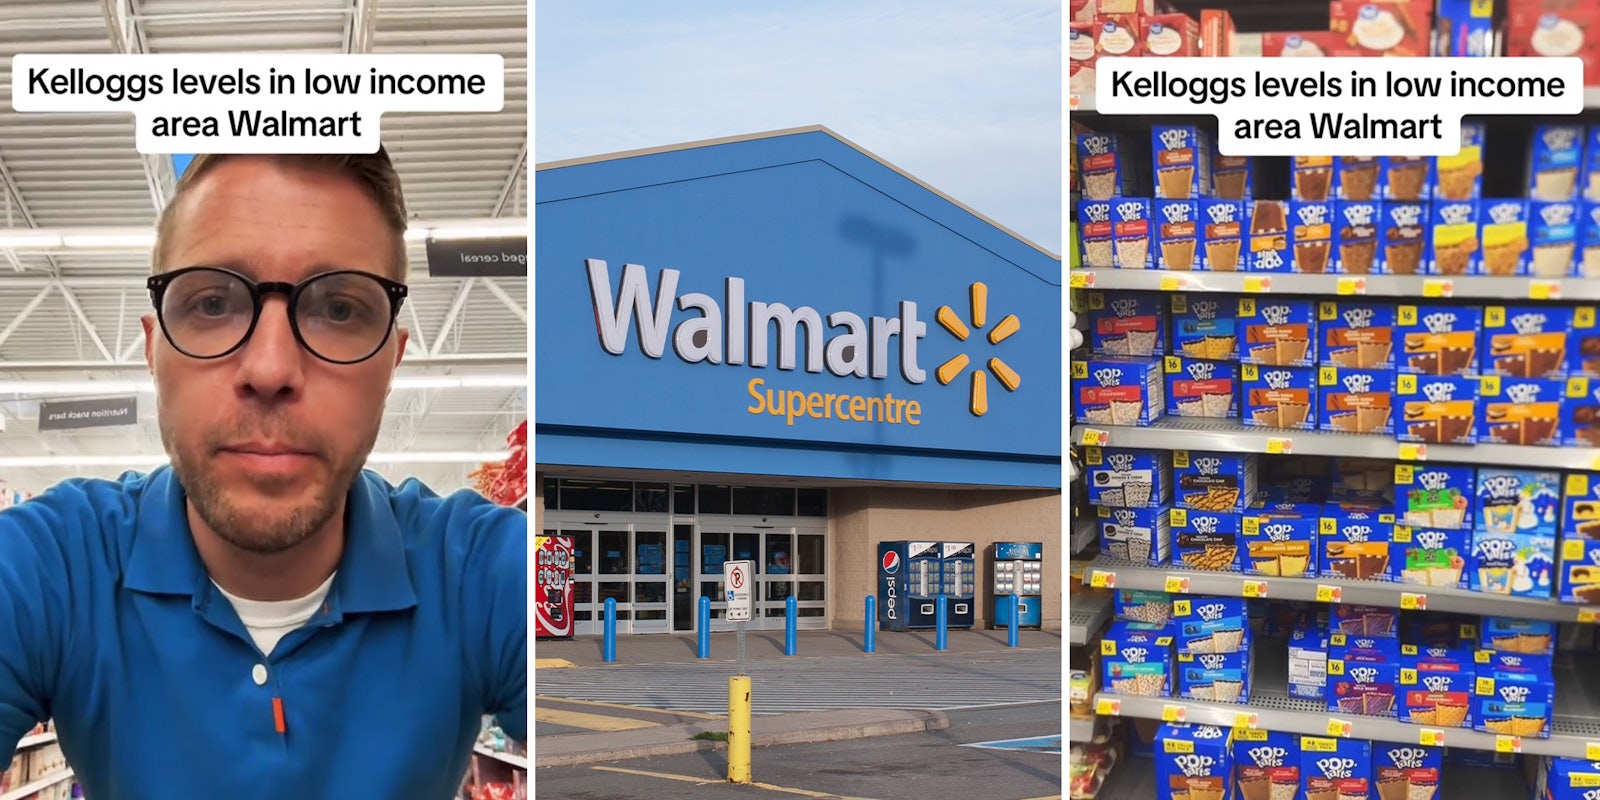 Walmart shopper shows what the Kellogg's products look like in ‘low-income area’